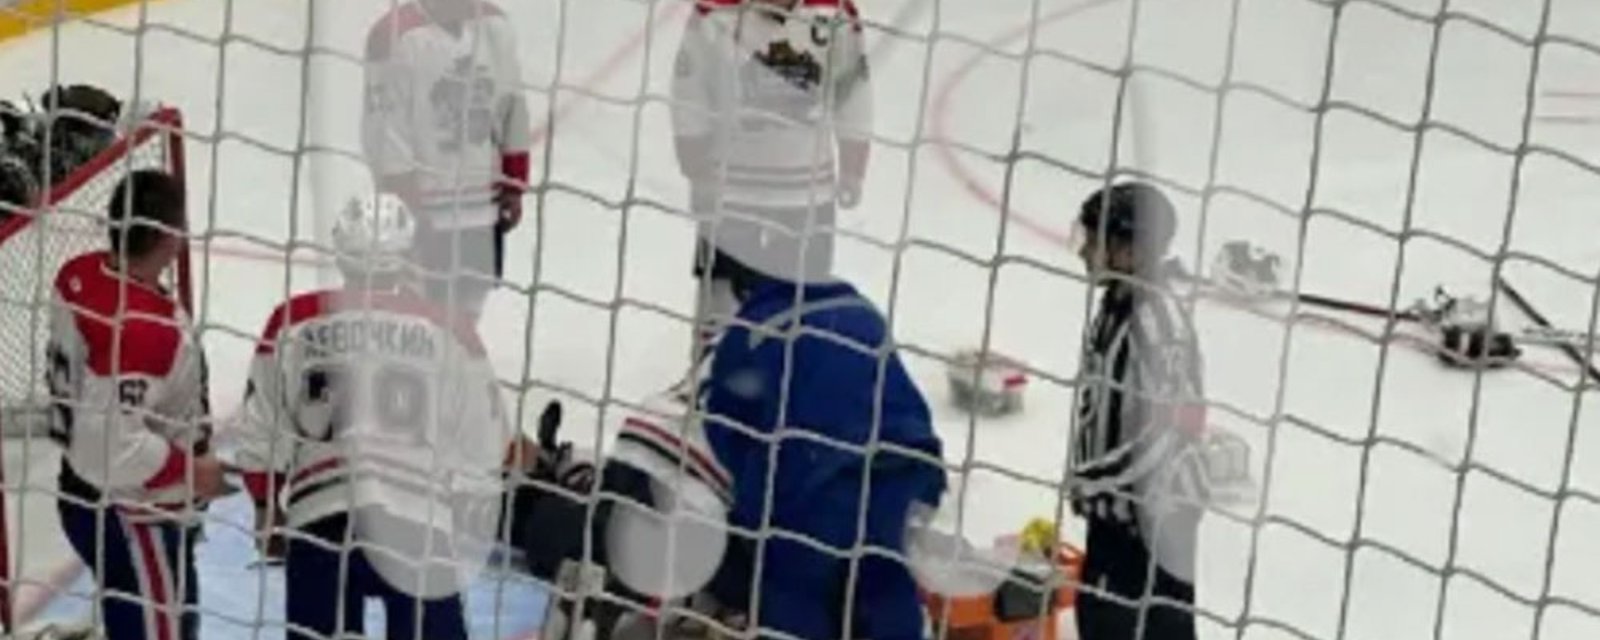 Goalie tragically dies on the ice during warm-up